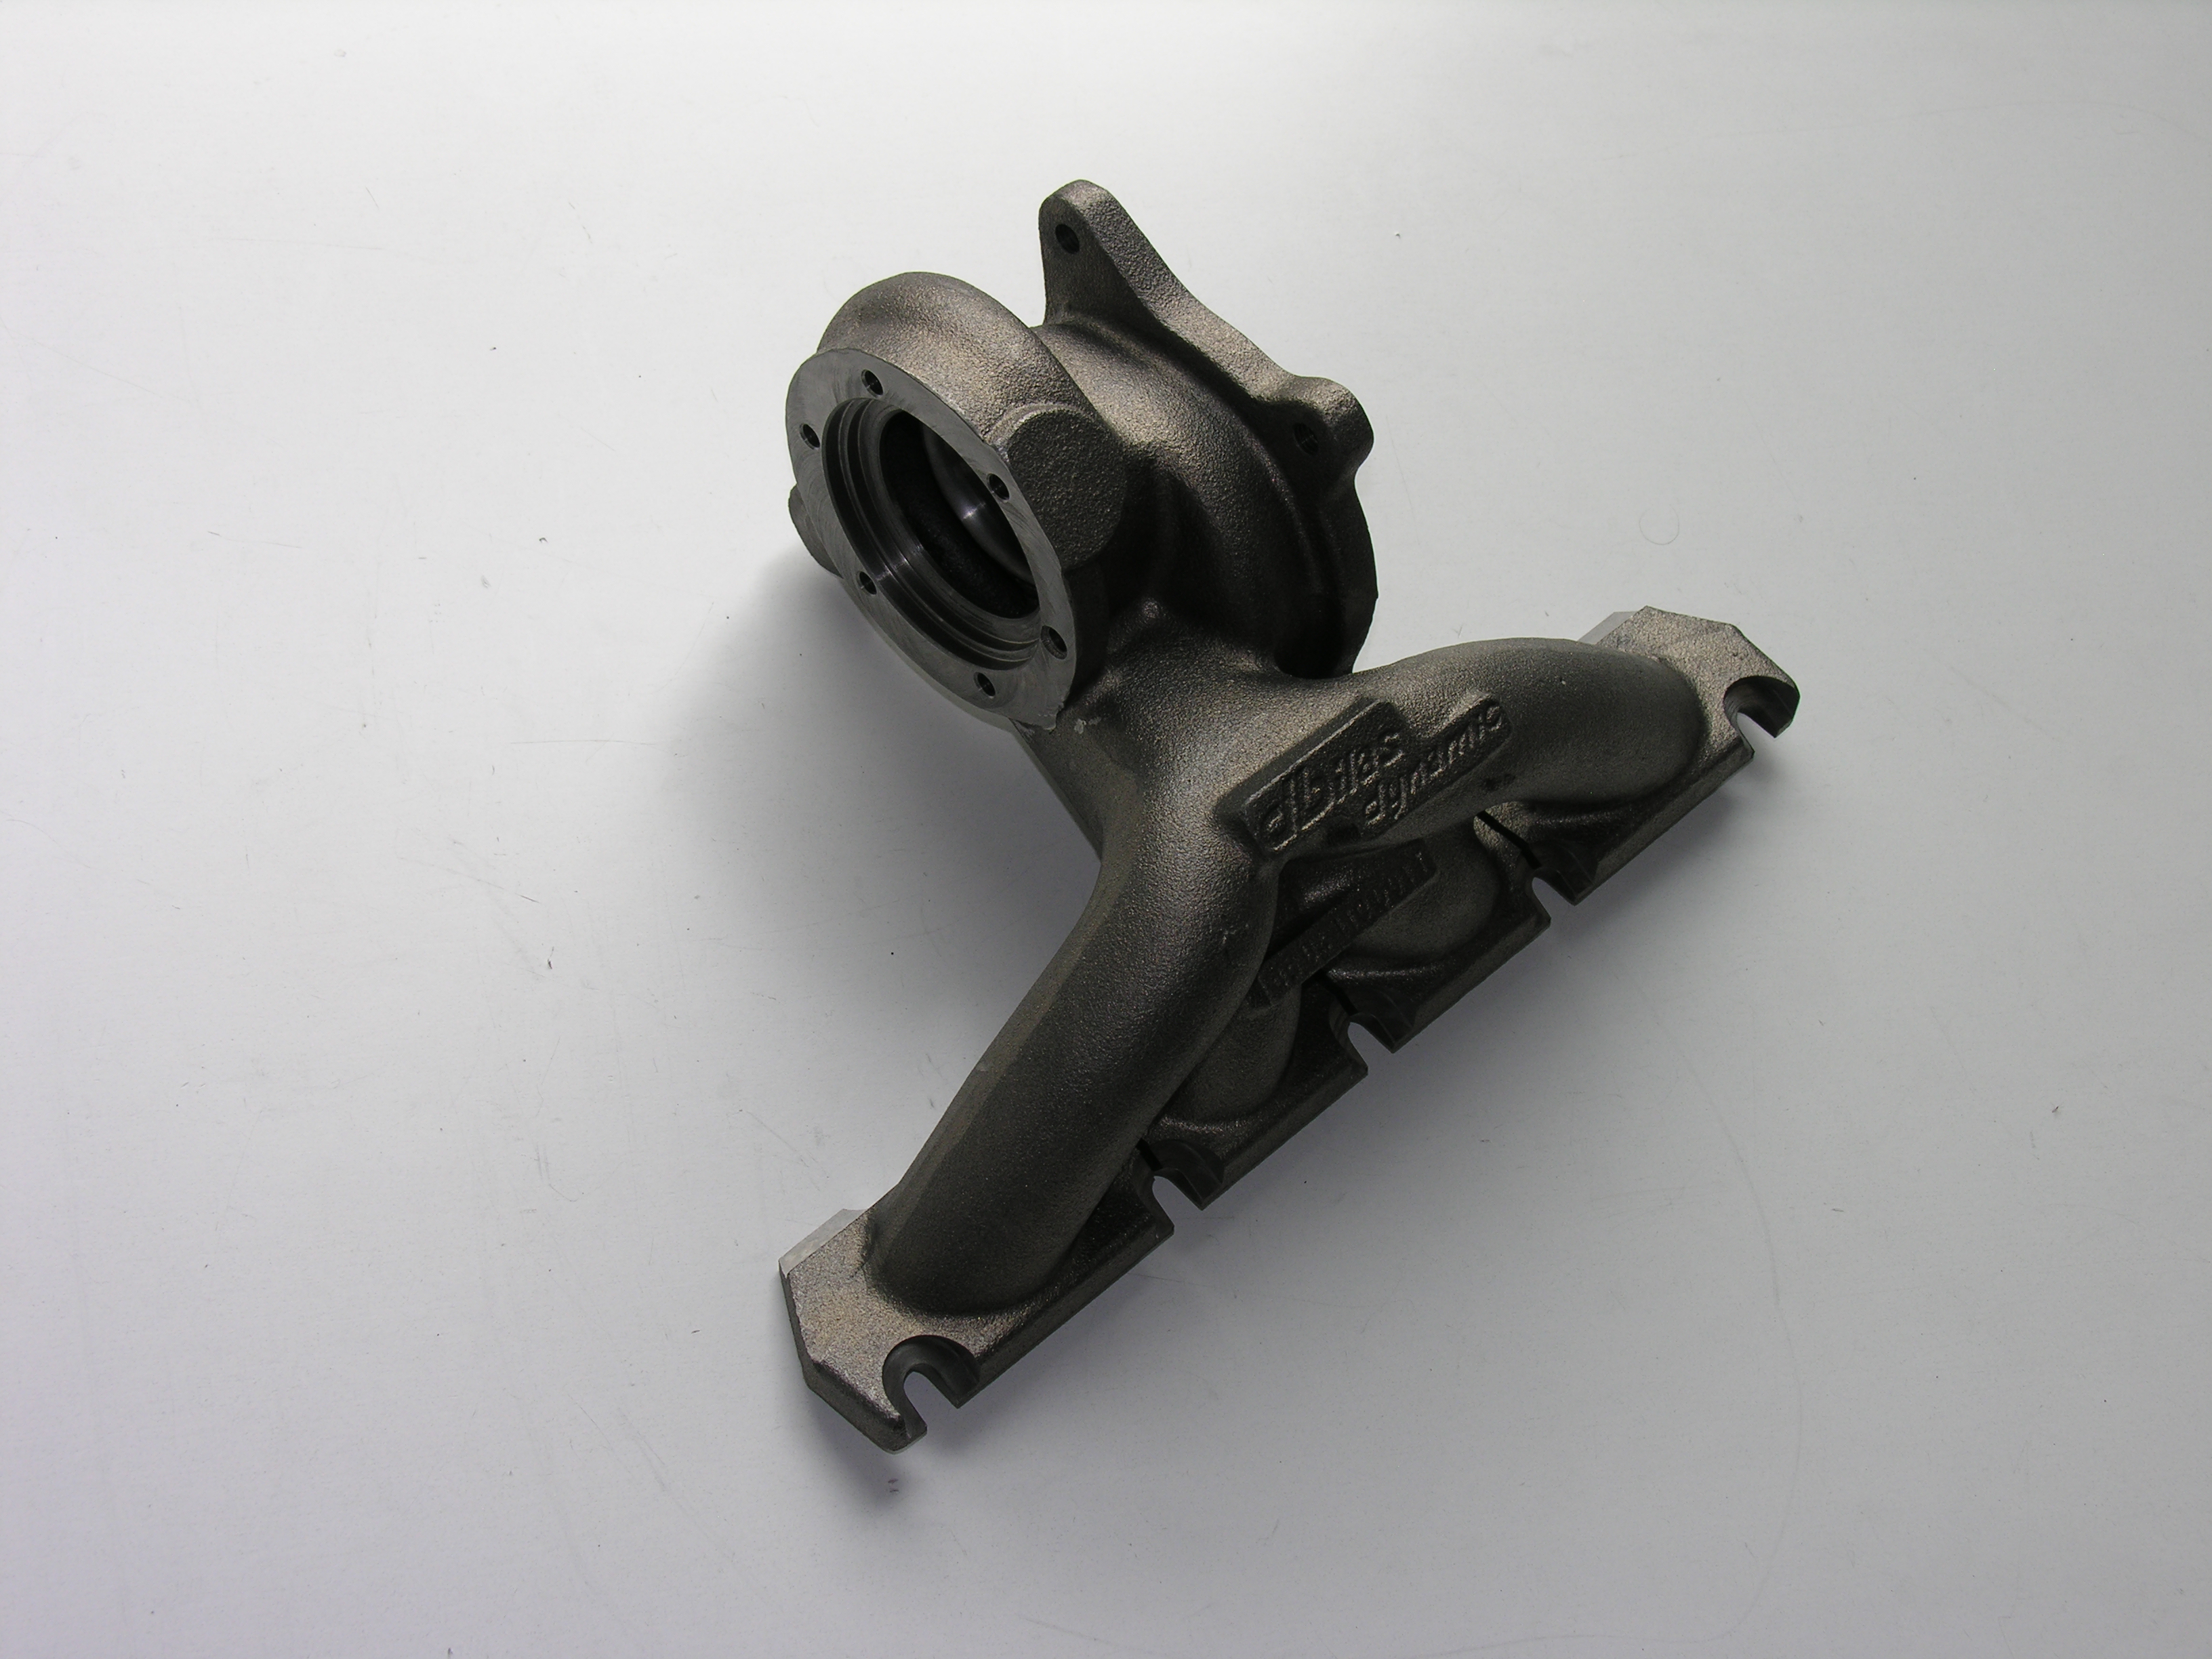 Stainless stell Turbo exhaust manifold with turbine housing  VW 2,0 TFSI group for GT29 Series ball bearing